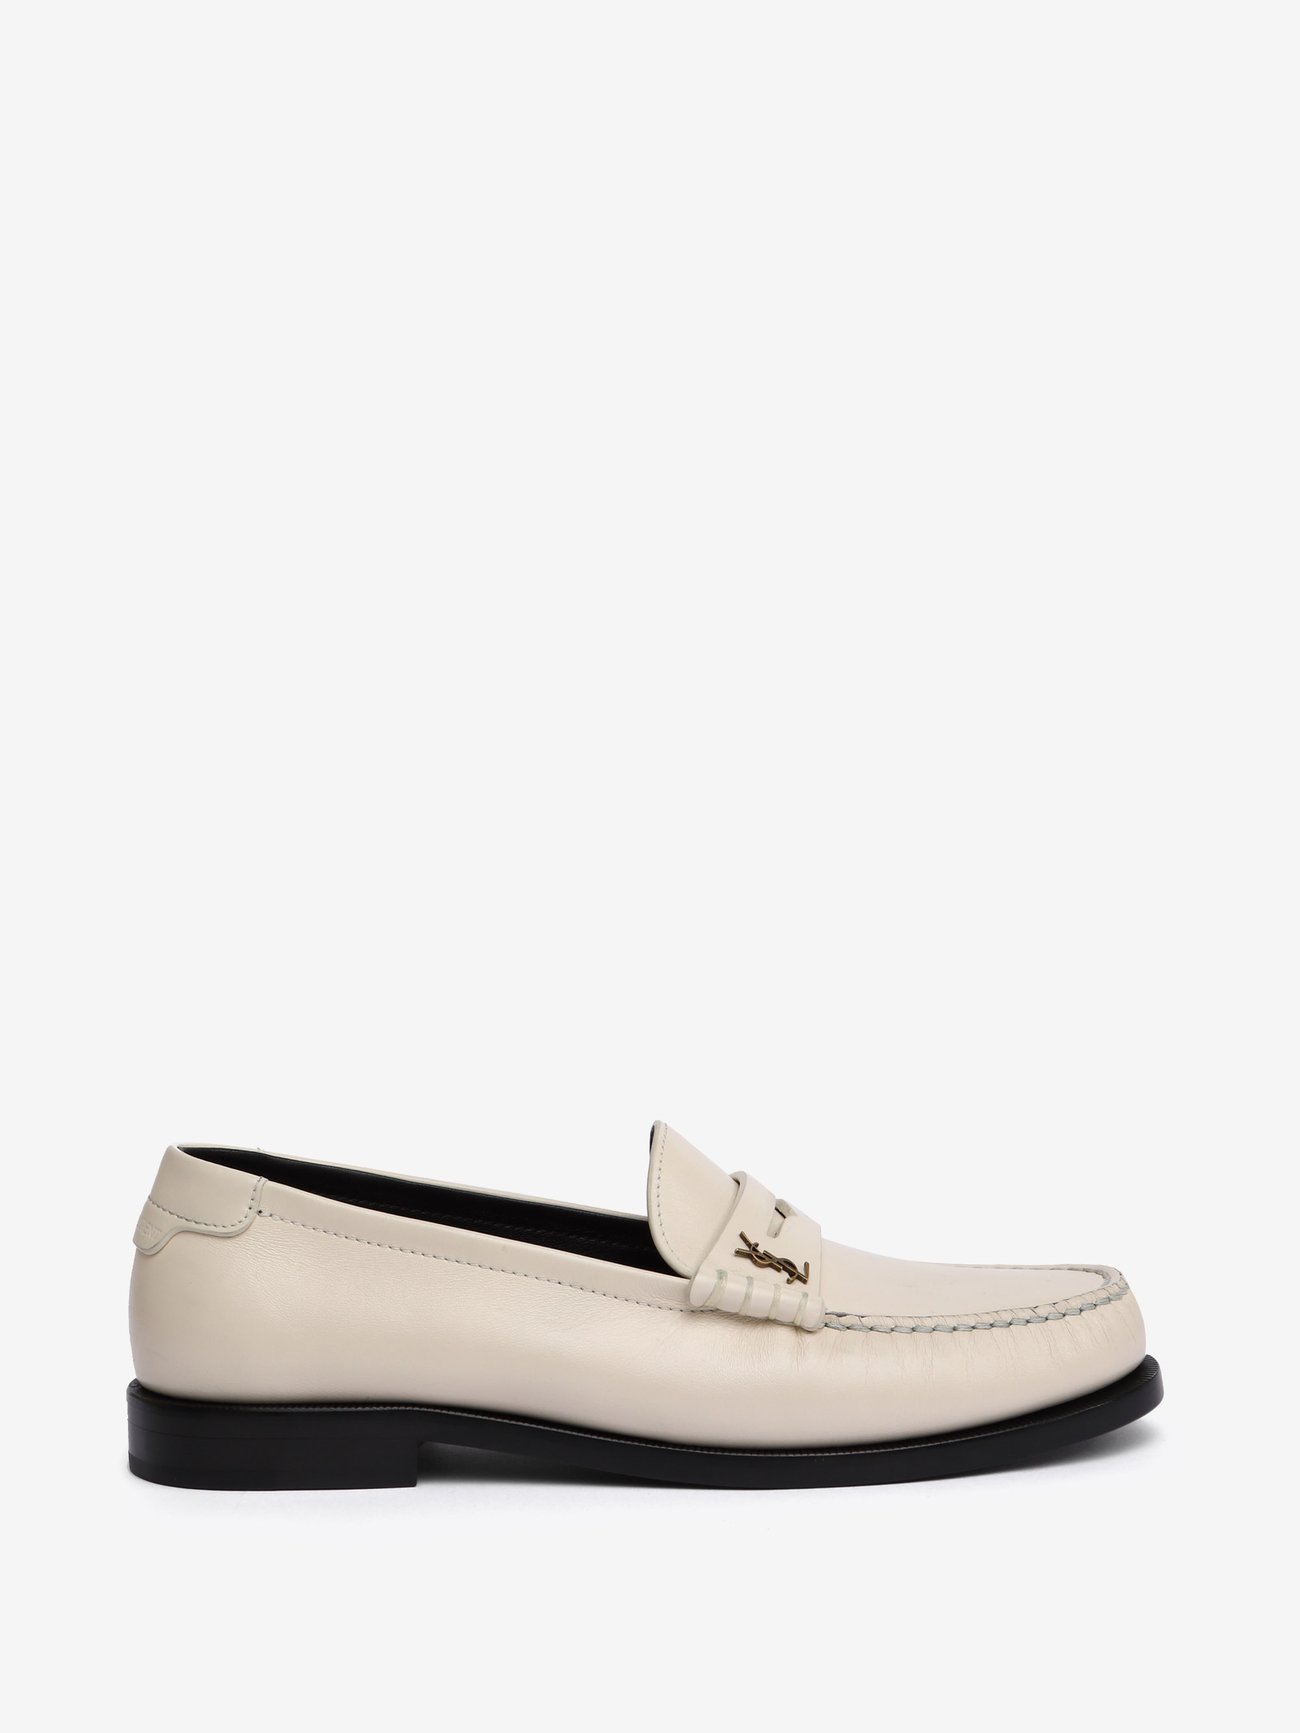 Saint Laurent Loafers Are the Shoe of 2023 | Who What Wear